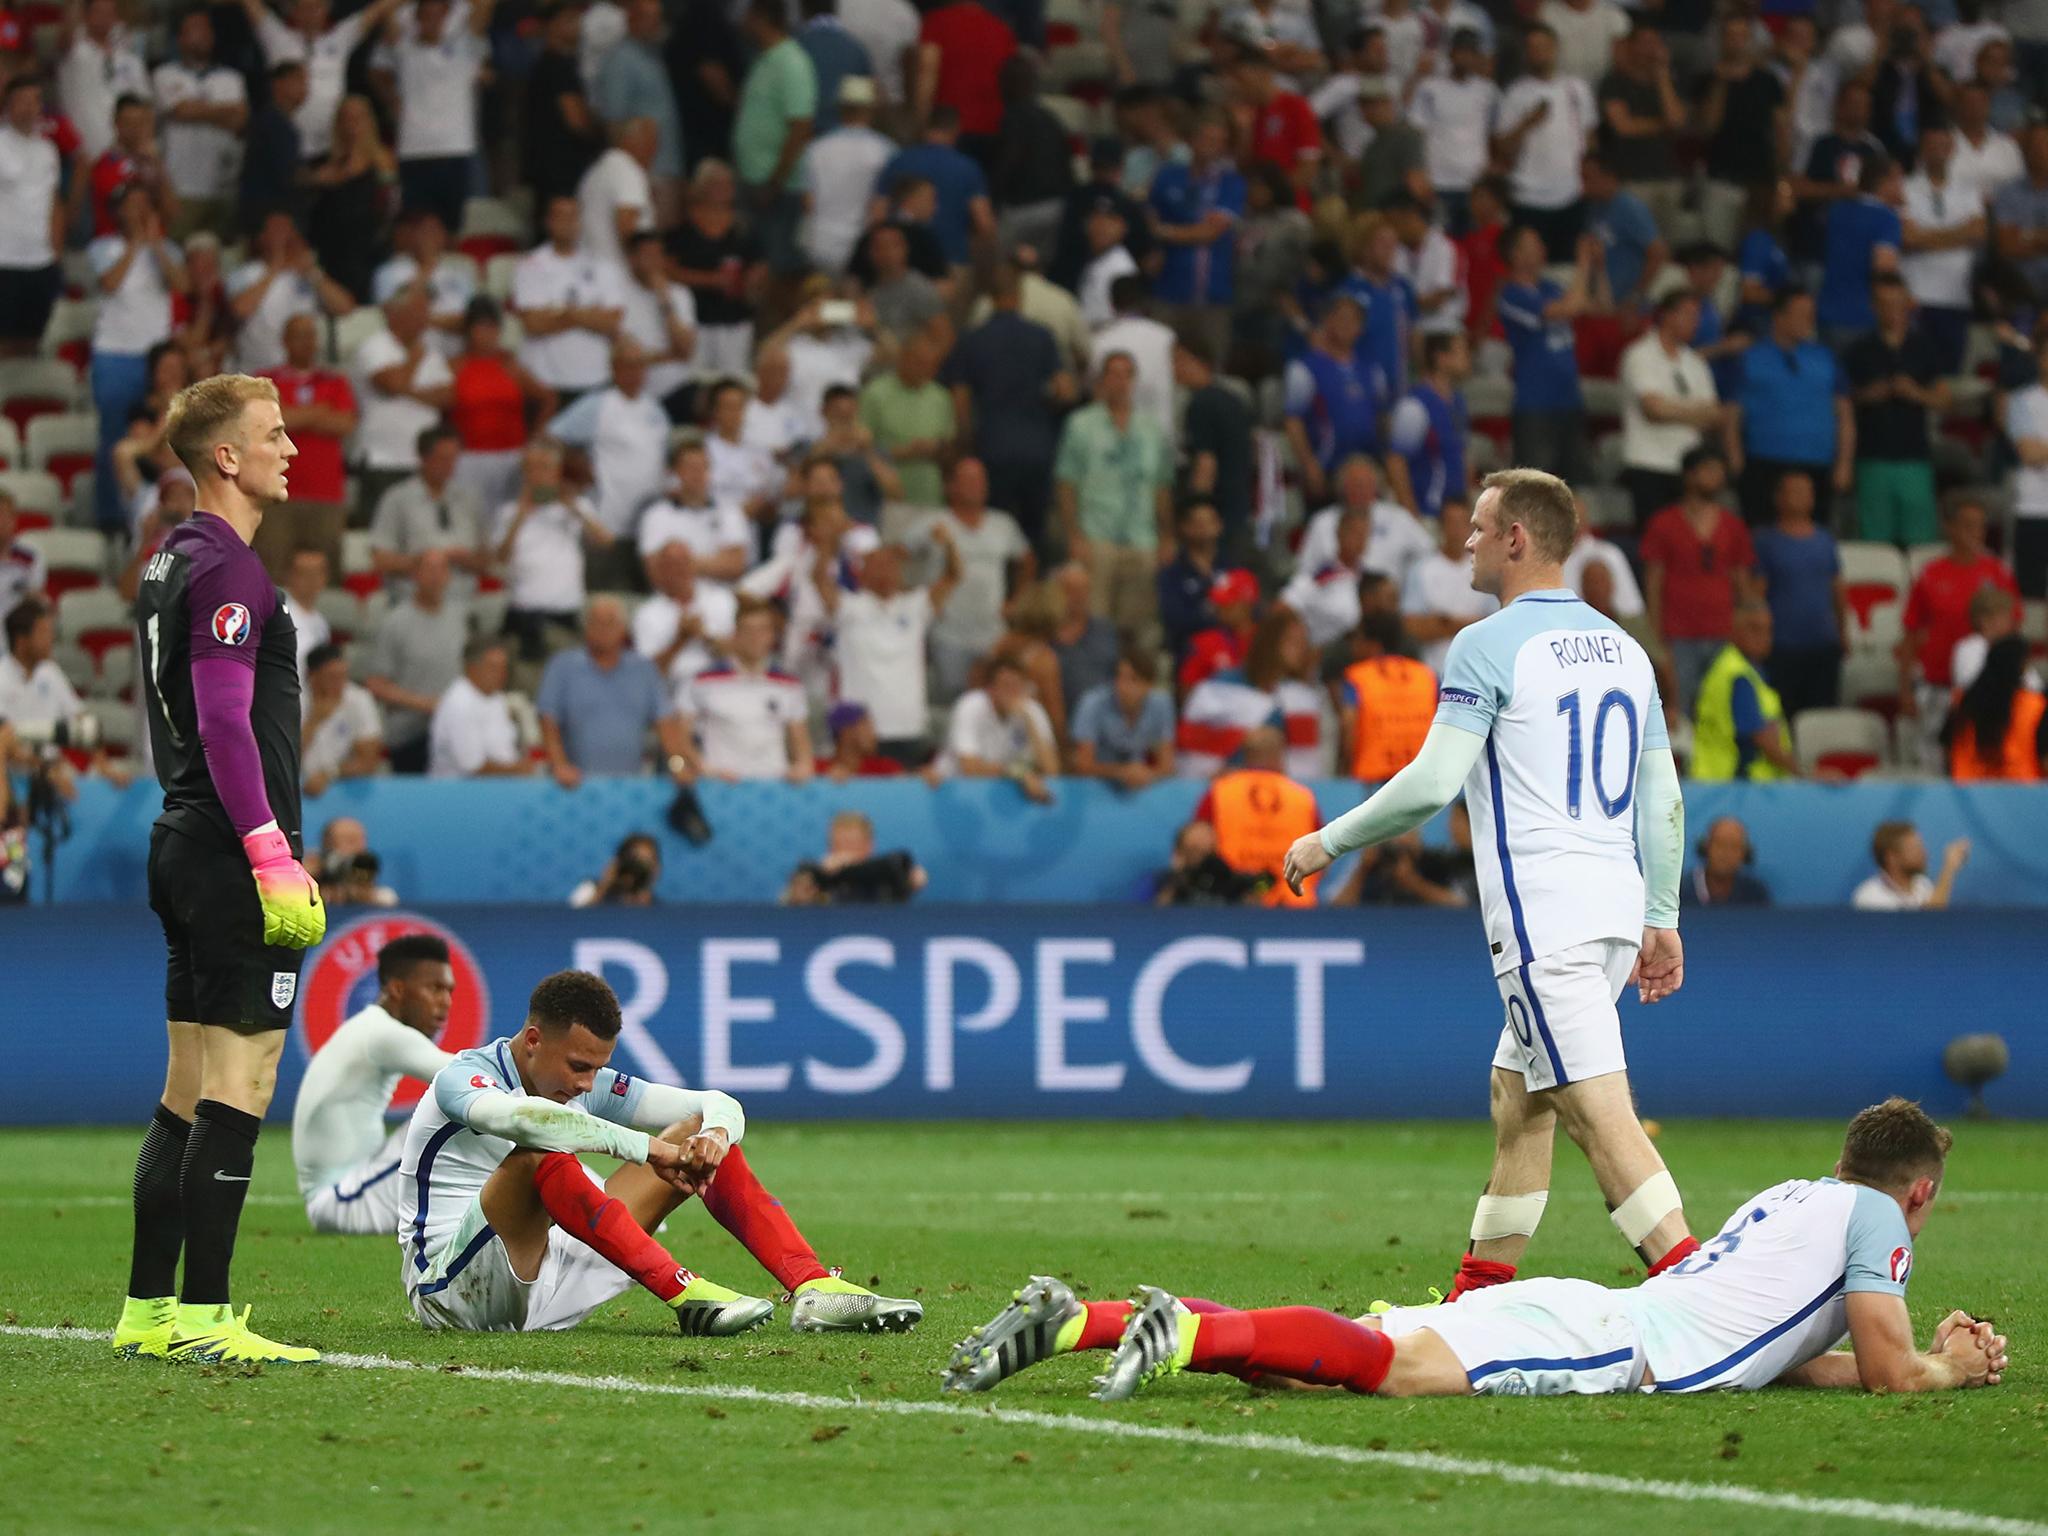 England hope to make up for their Euro 2016 failure at the World Cup in Russia